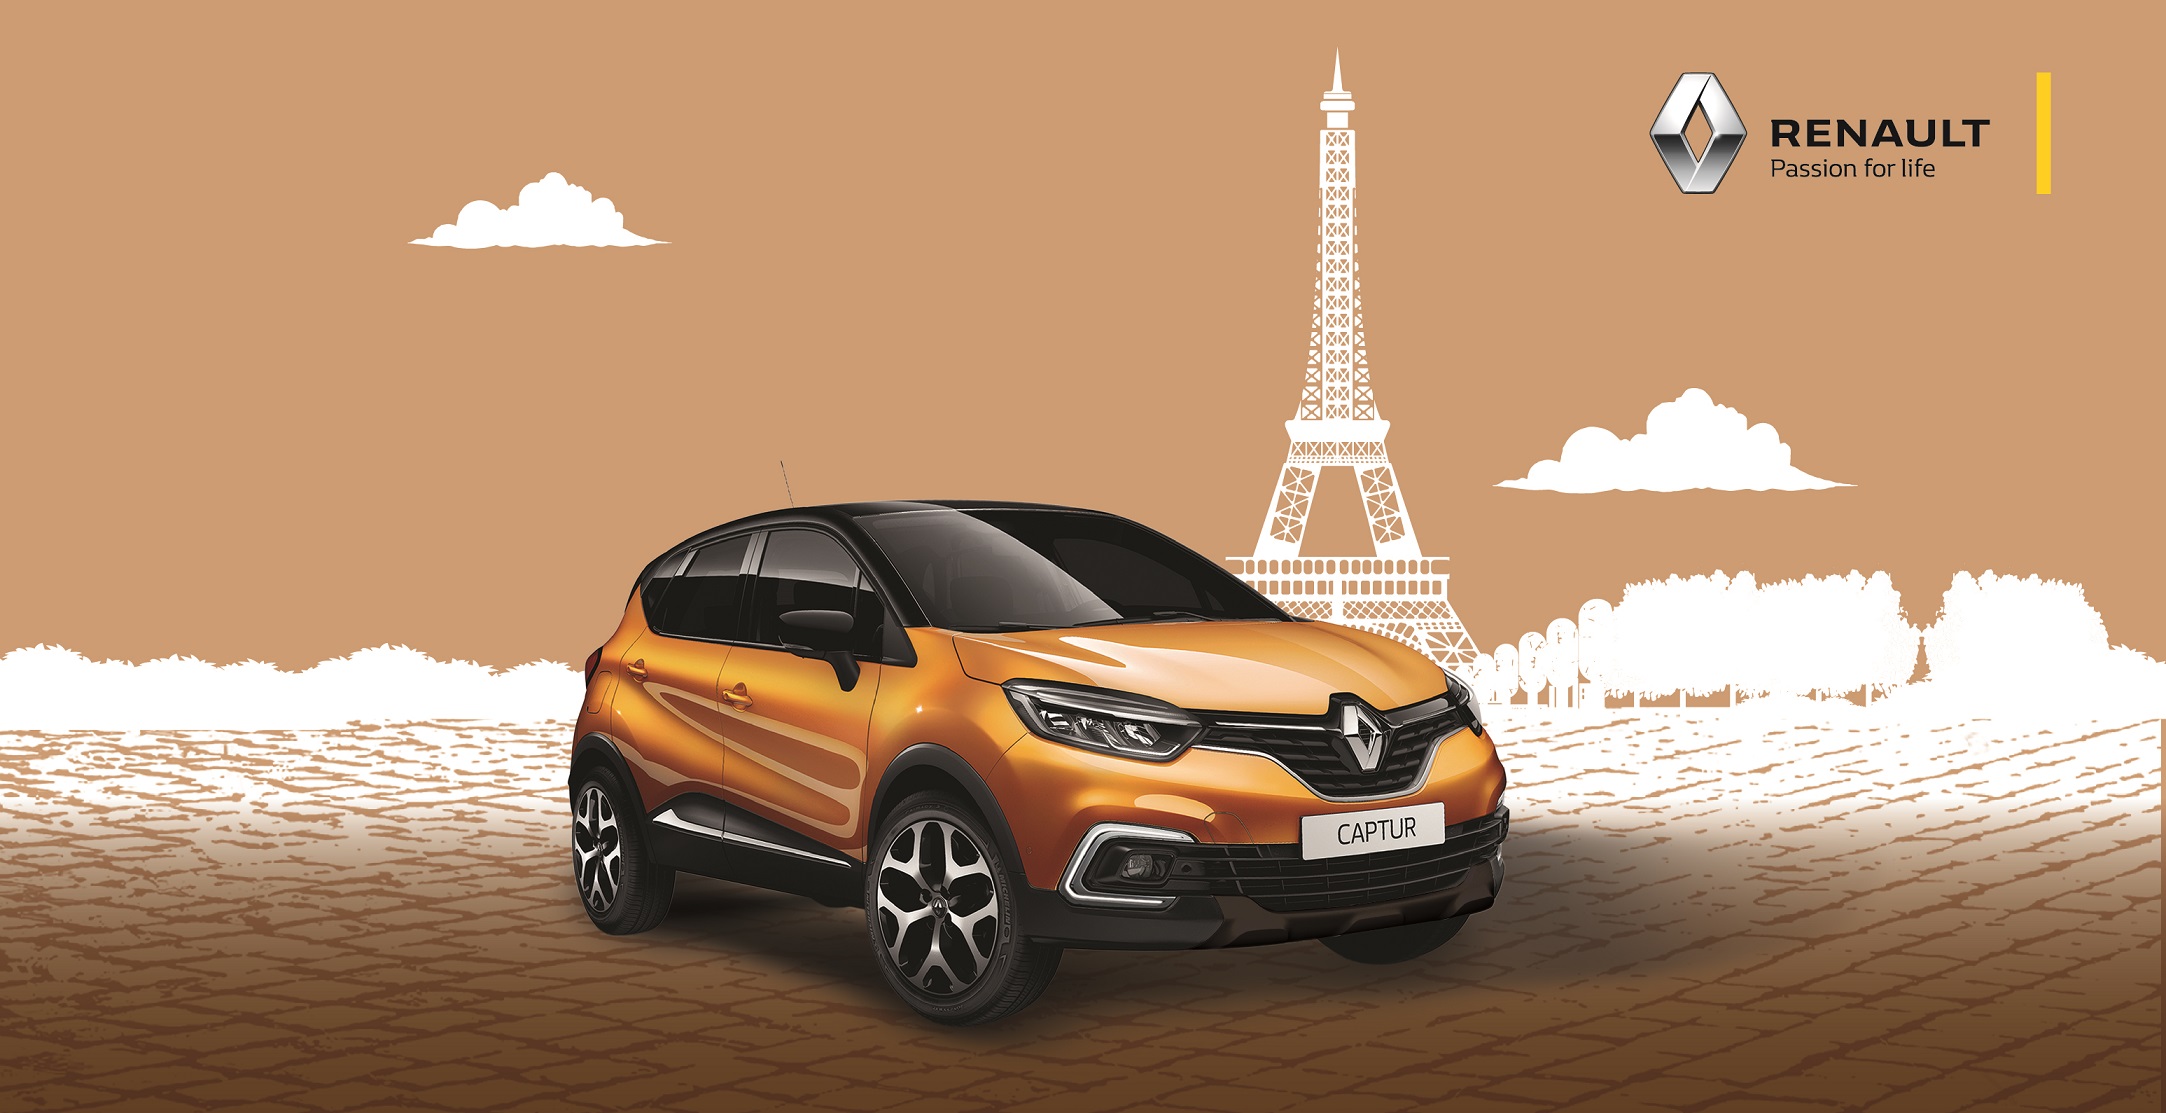 The French Experience Campaign By Tcec Renault Could See You In Paris News And Reviews On Malaysian Cars Motorcycles And Automotive Lifestyle